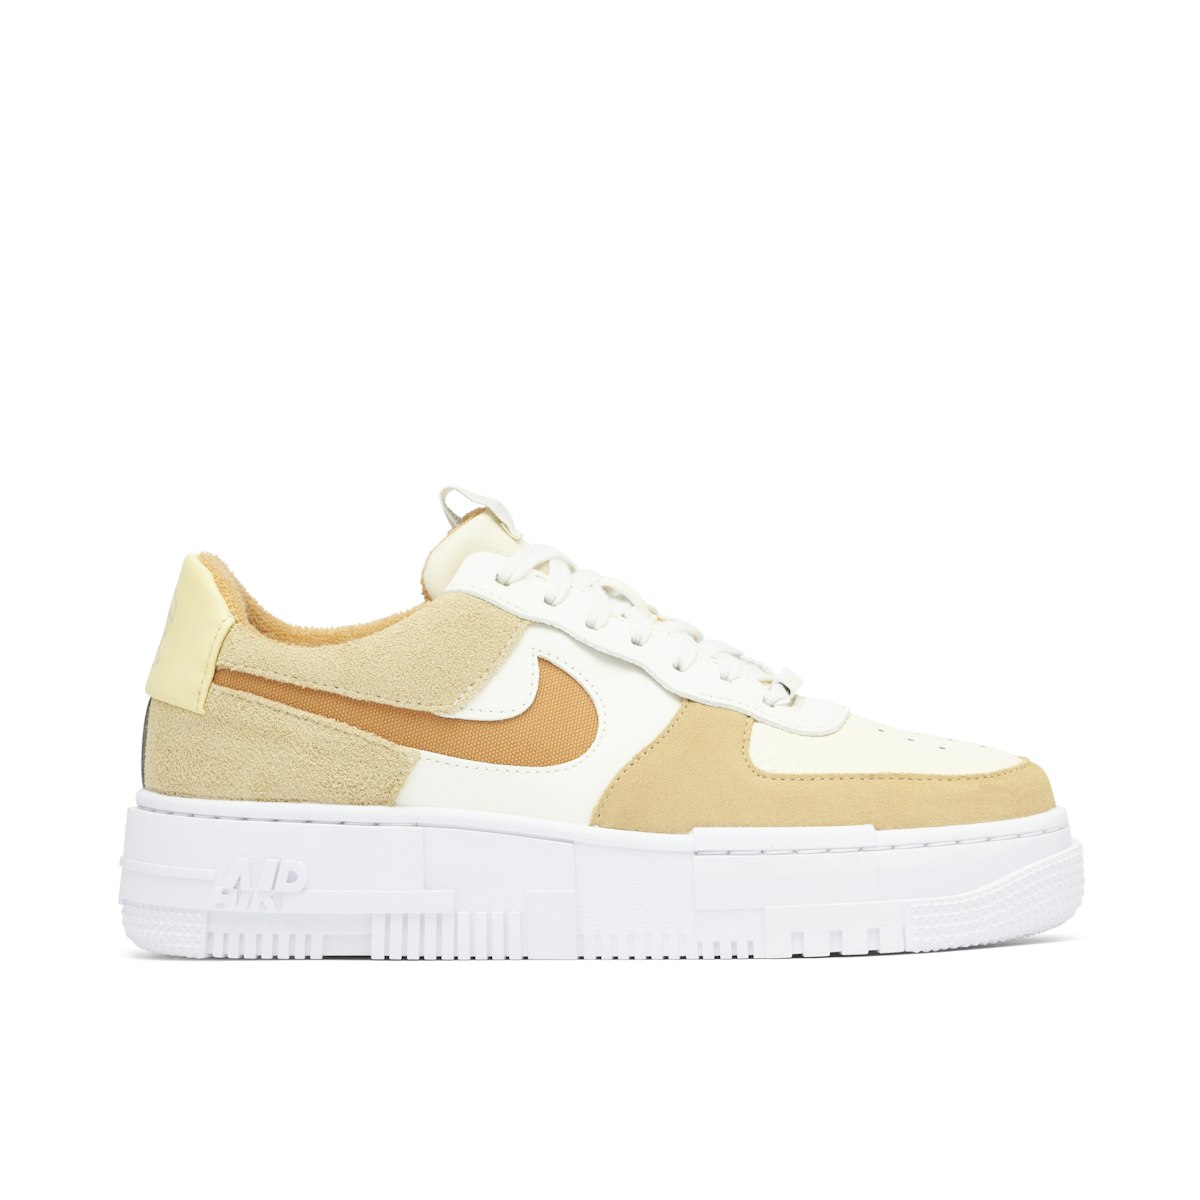 Air Force 1 Low UV Reactive Swoosh White Blue Pink Womens